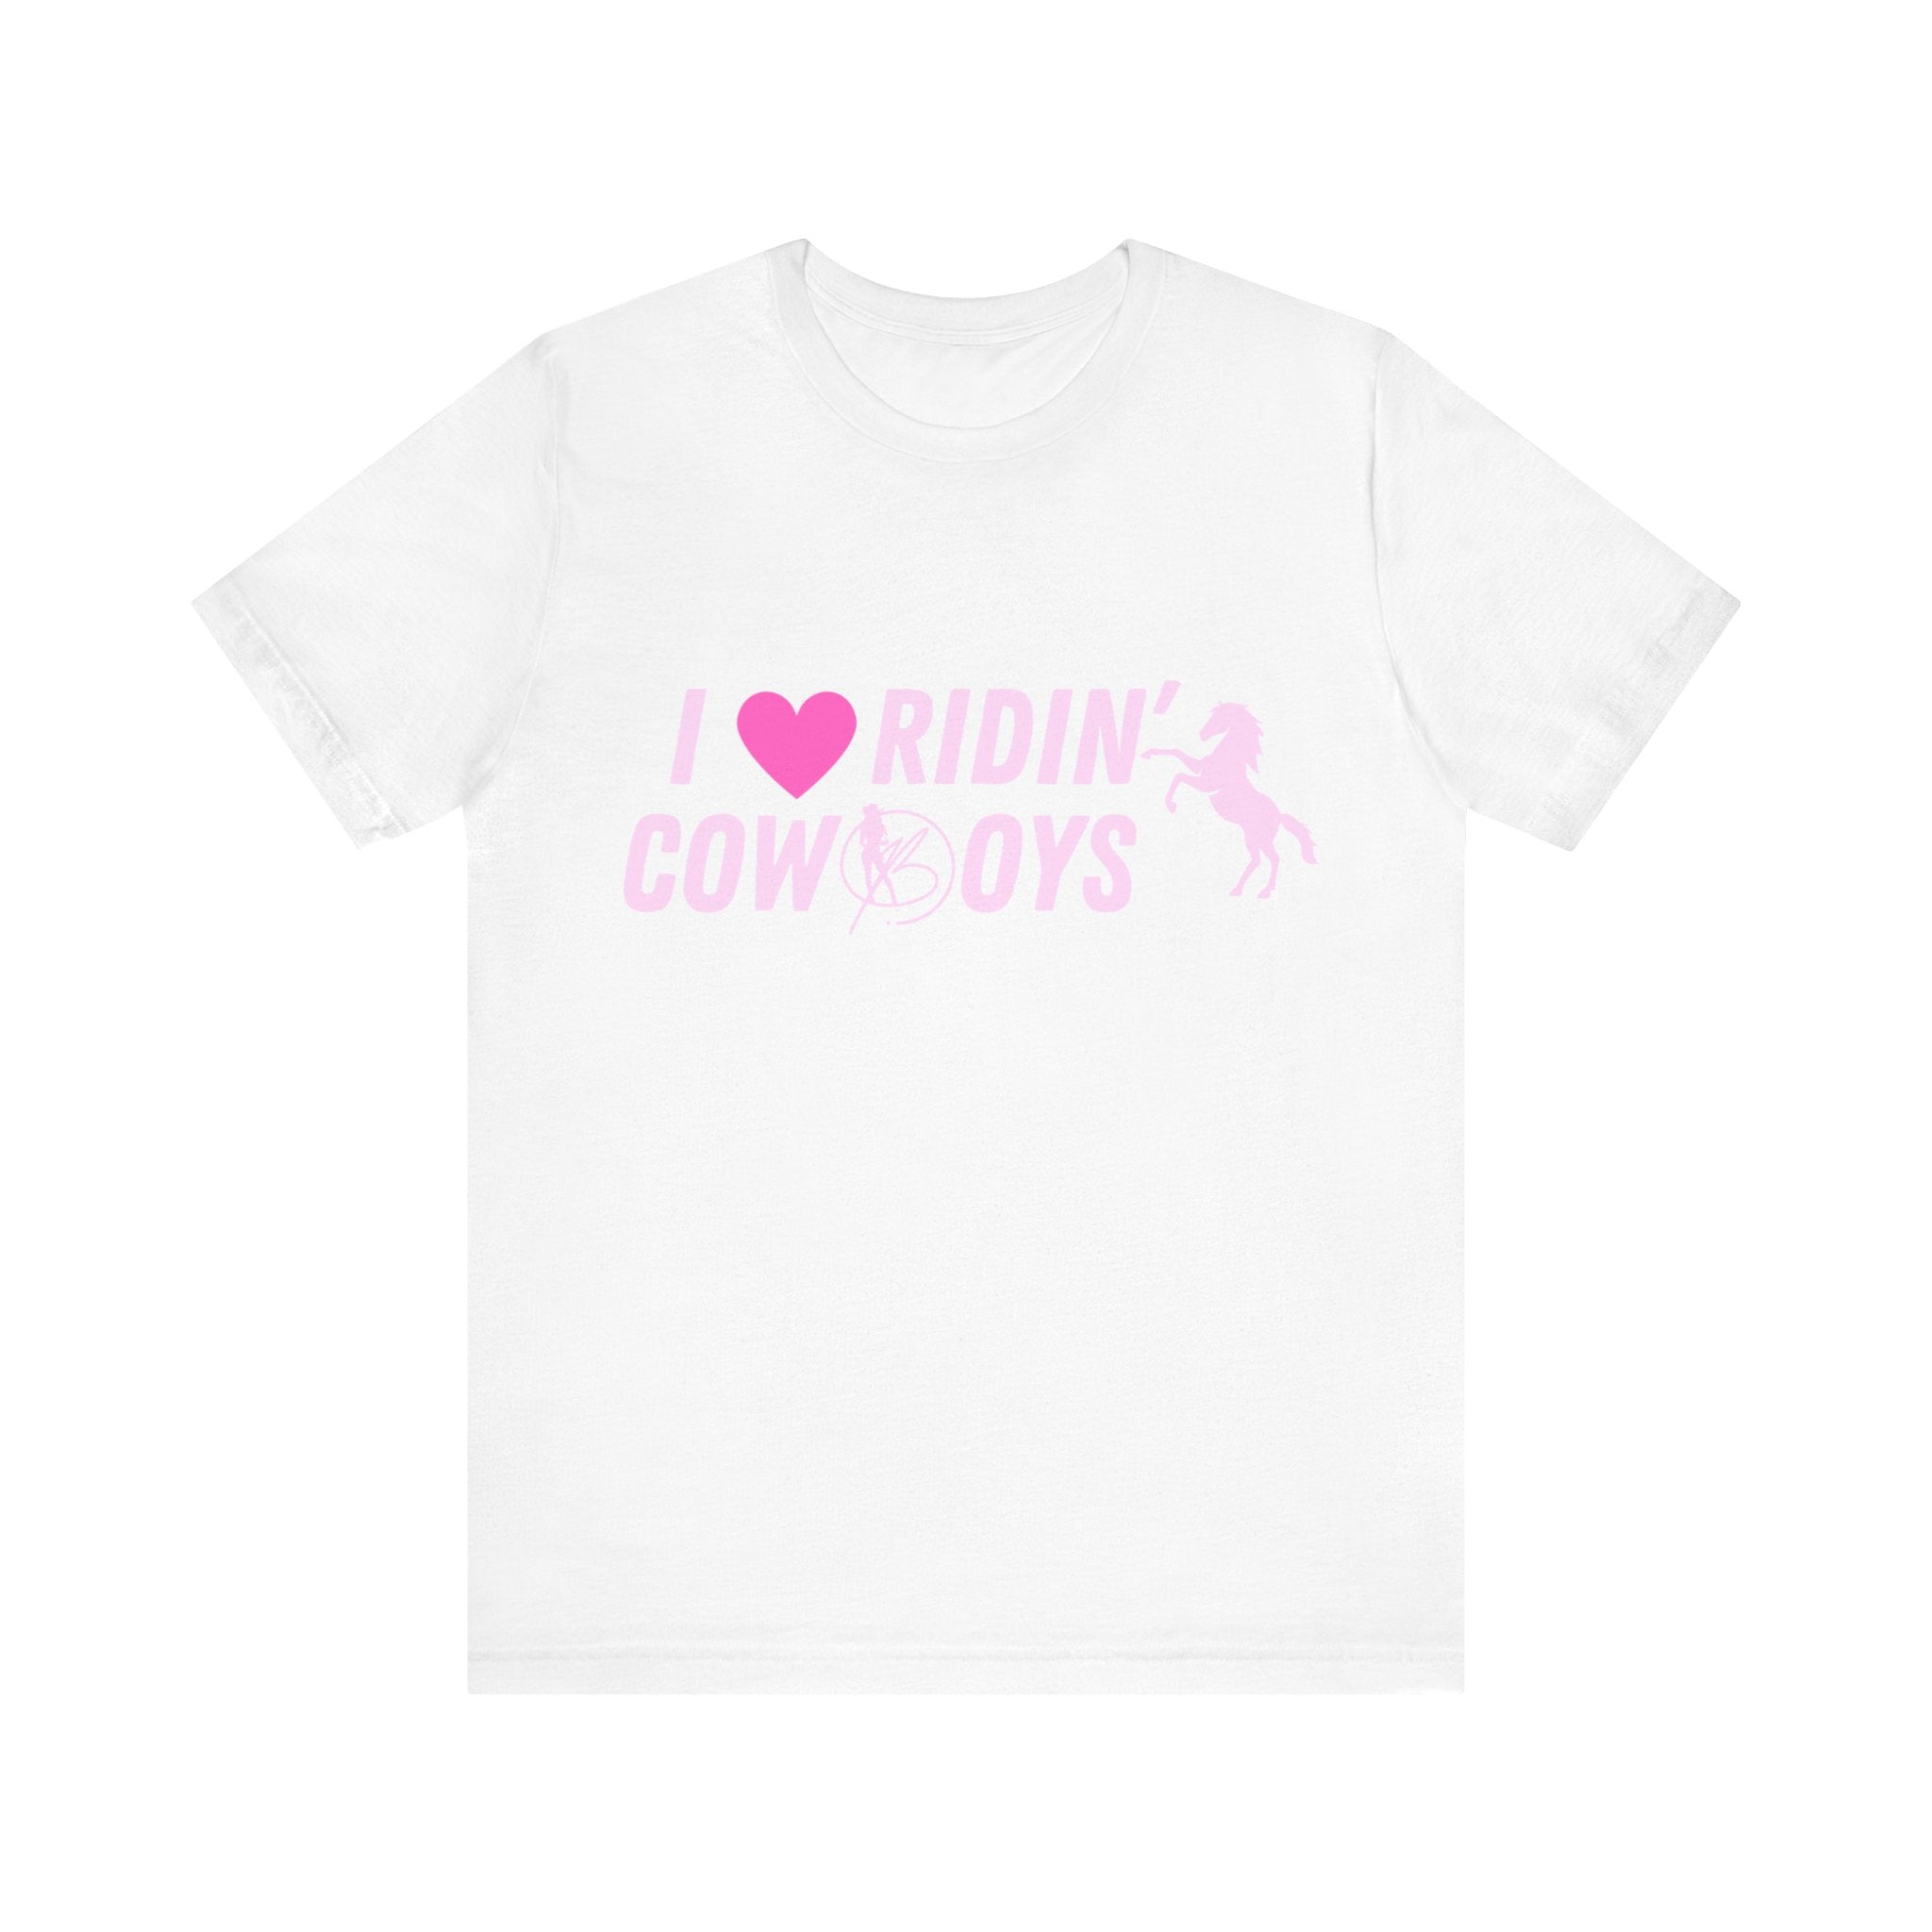 Cowgirl Couture Women’s Tee: 'I ❤ Ridin' Cowboys